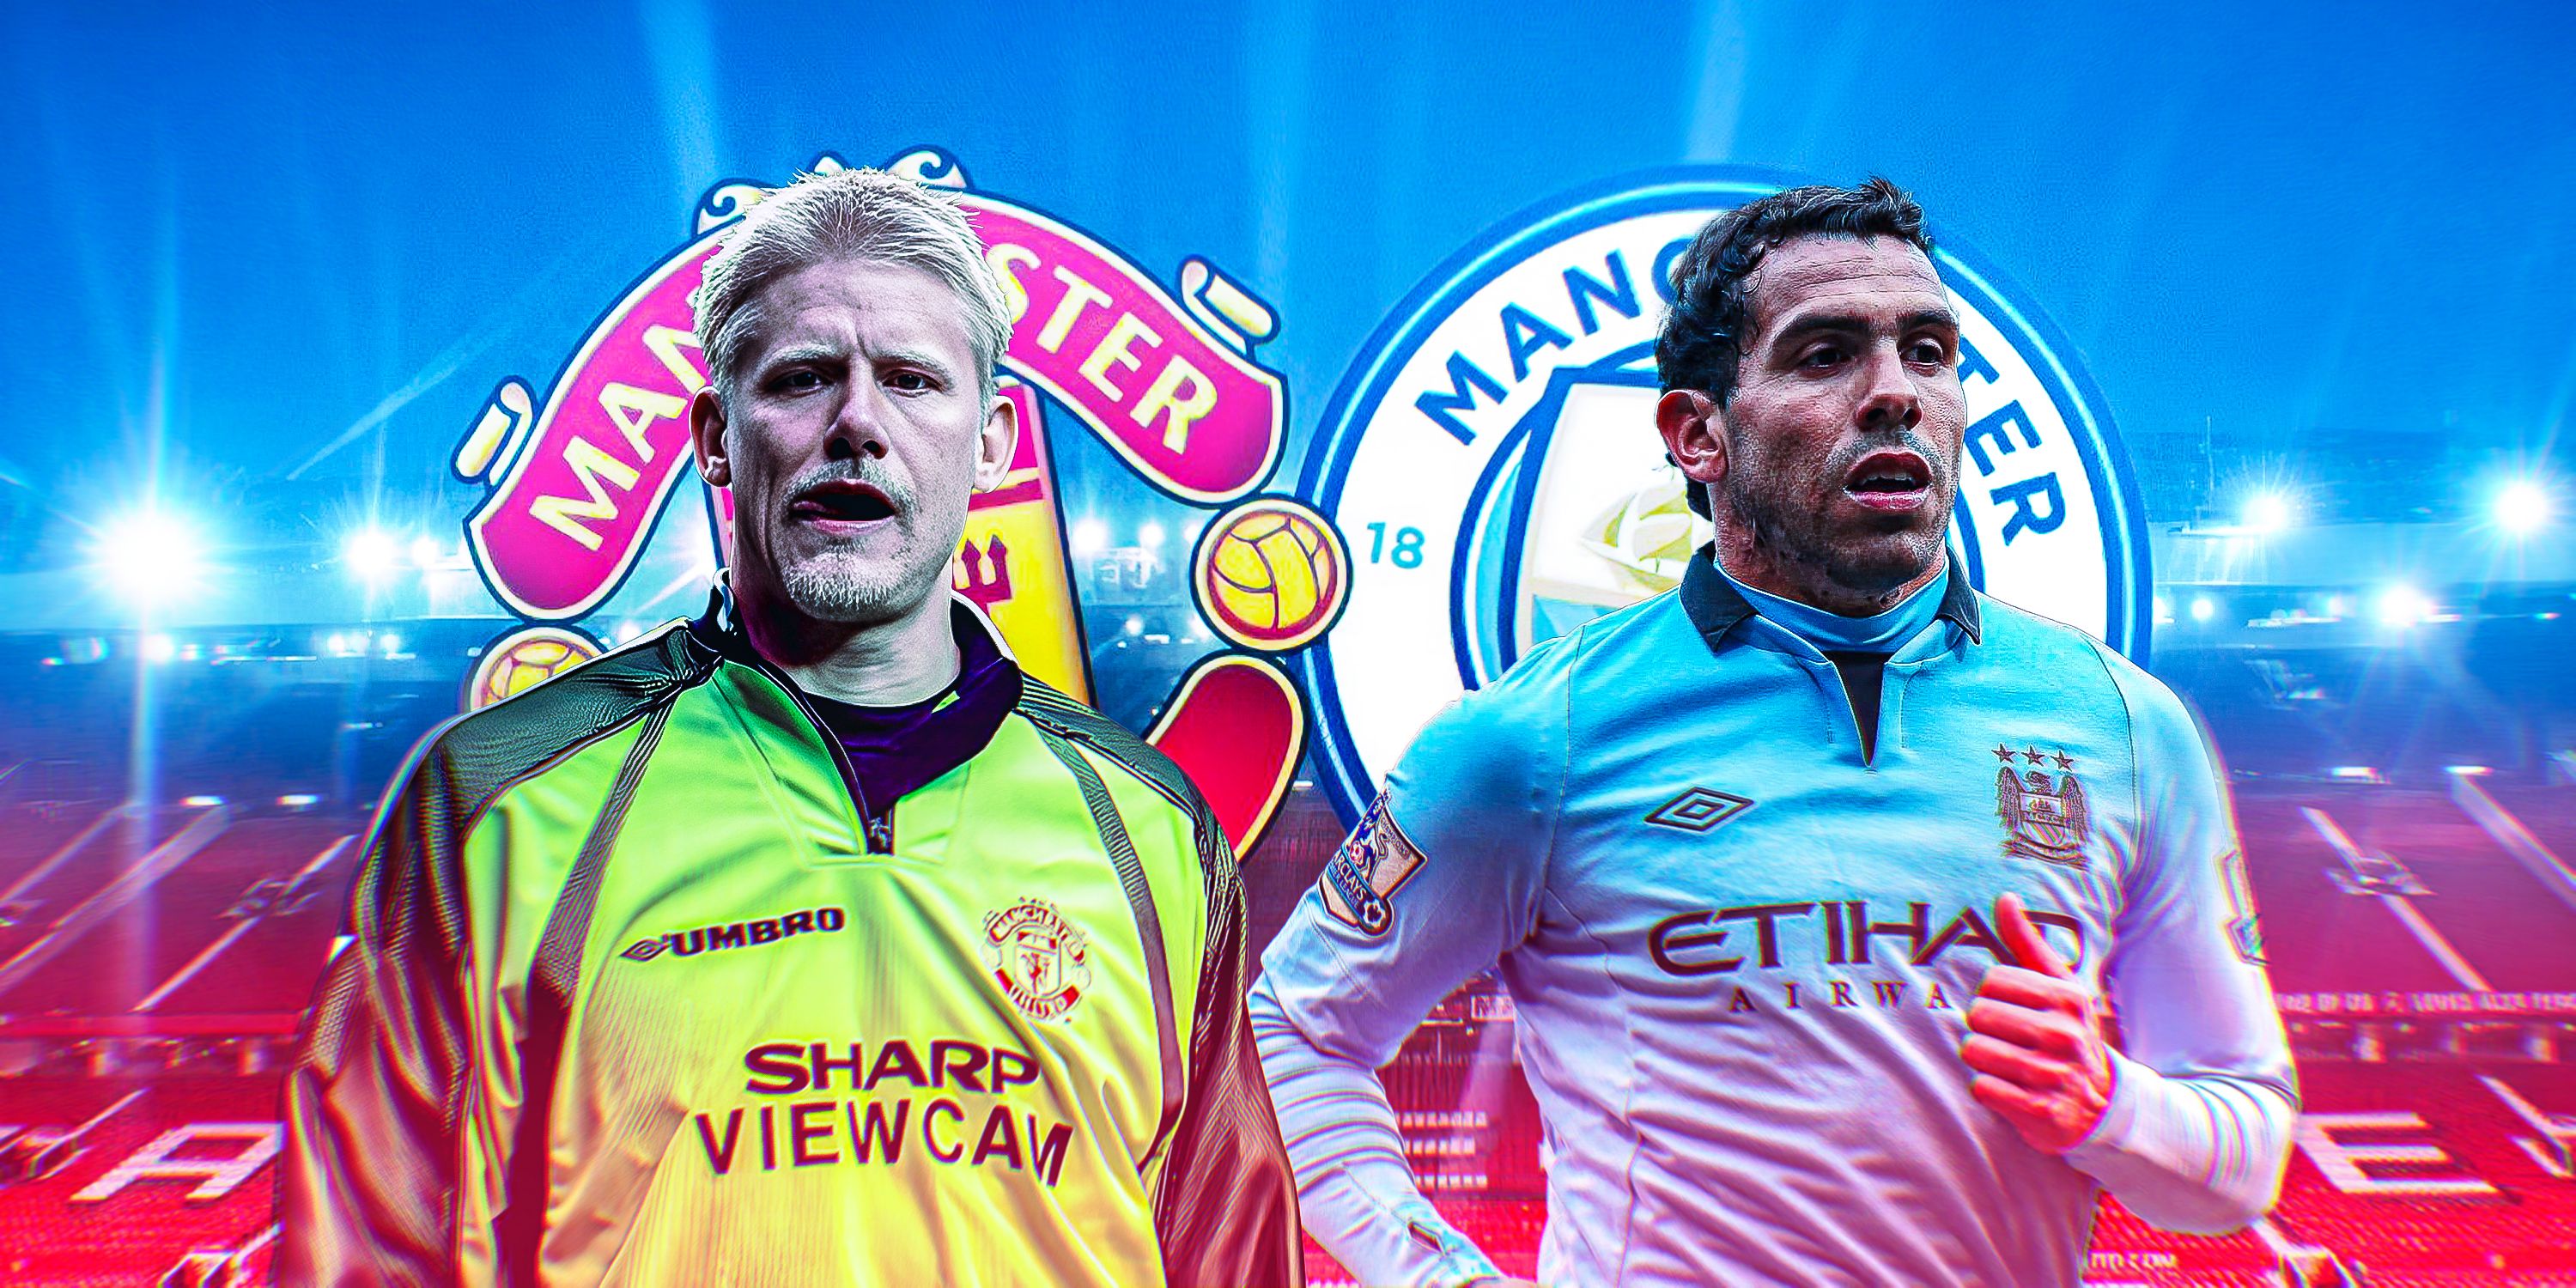 Manchester United's Peter Schmeichel and Manchester City's Carlos Tevez.